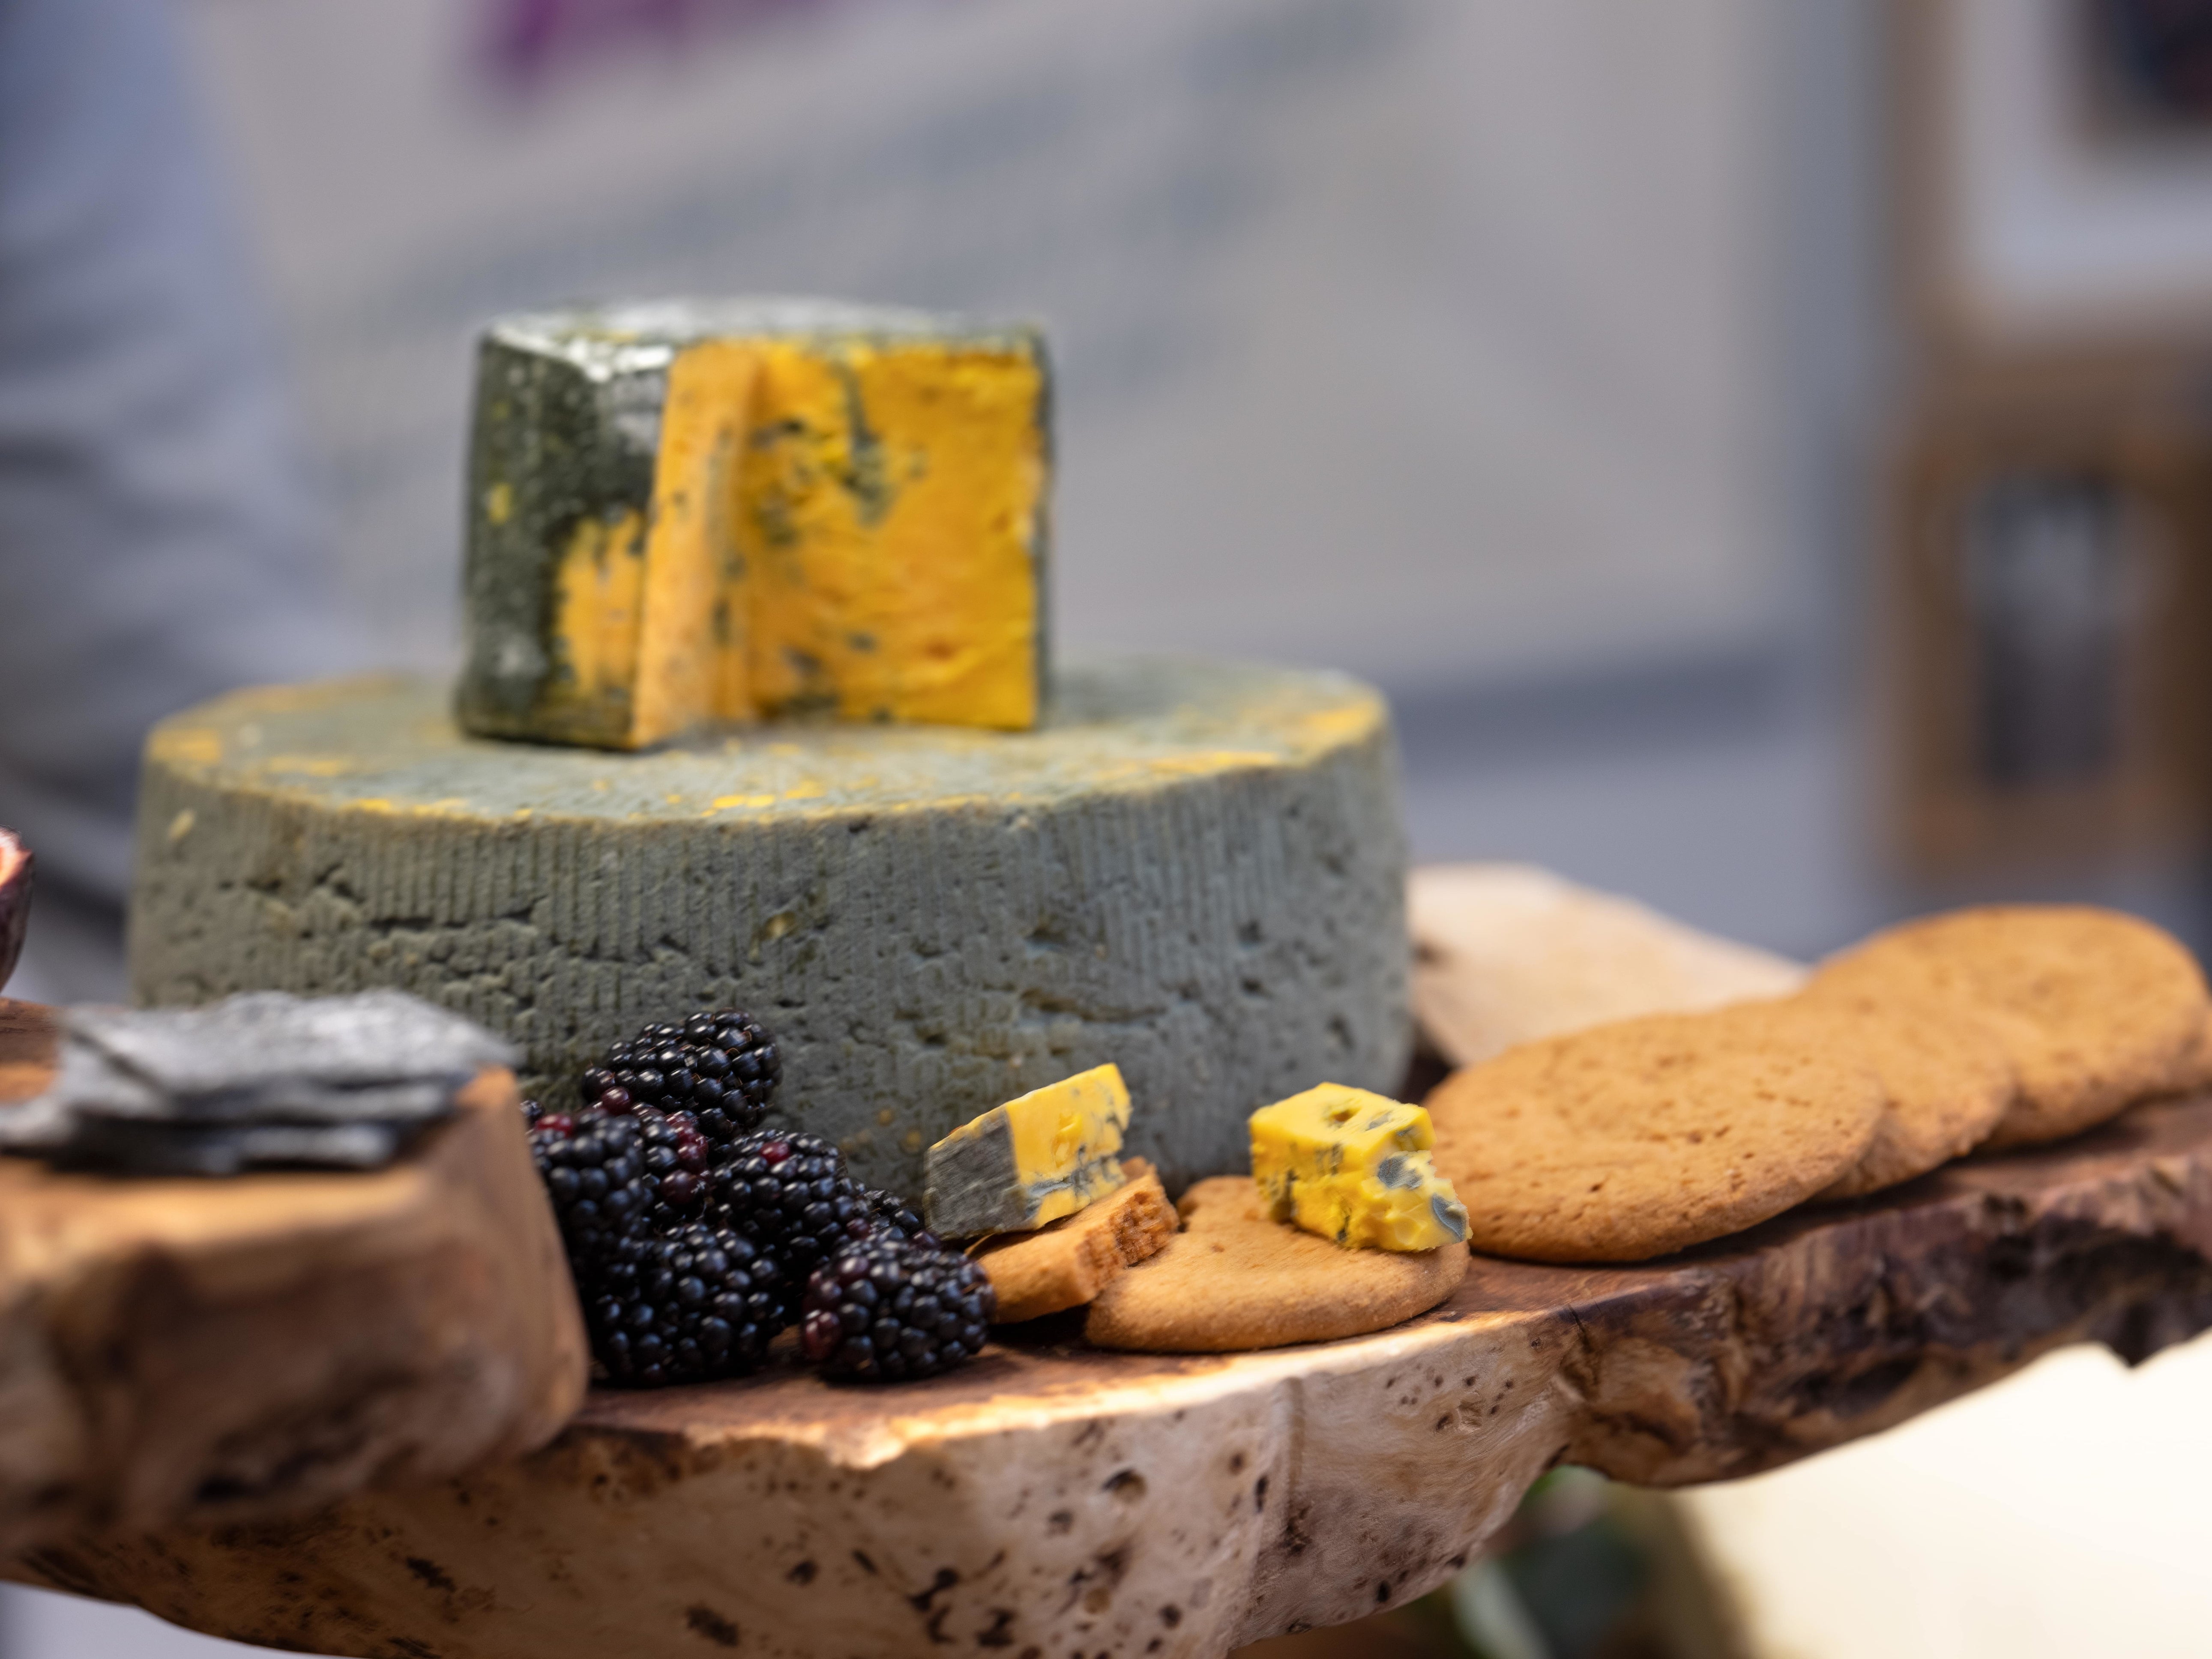 Celebration cheese, a Blacksticks Blue cheese wheel on a wooden cheese board with fruit and crackers.